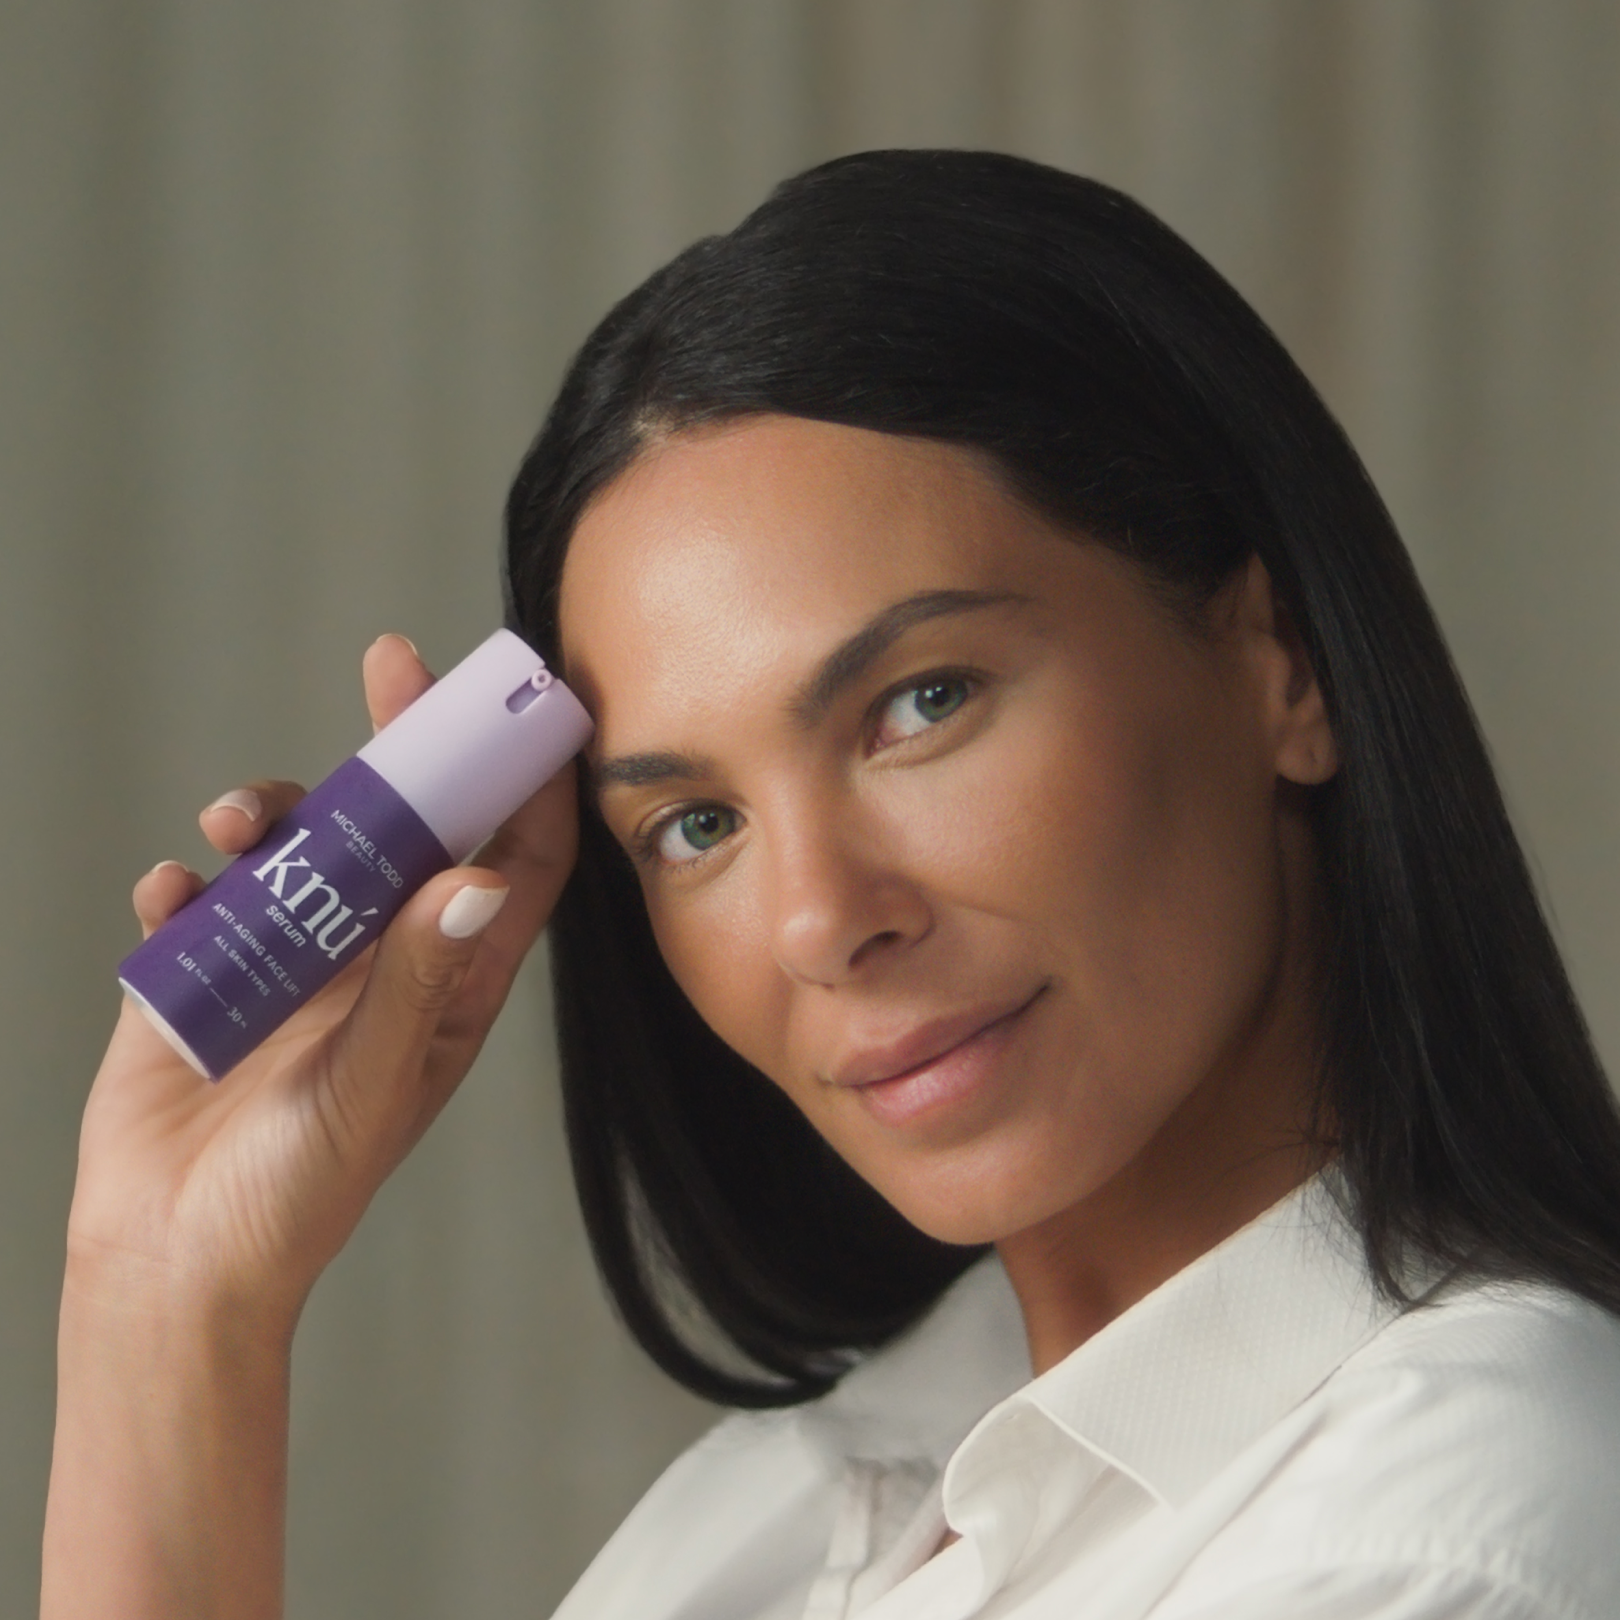 A woman is holding a bottle of Knú Ageless Duo serum by Michael Todd Beauty for firmness.